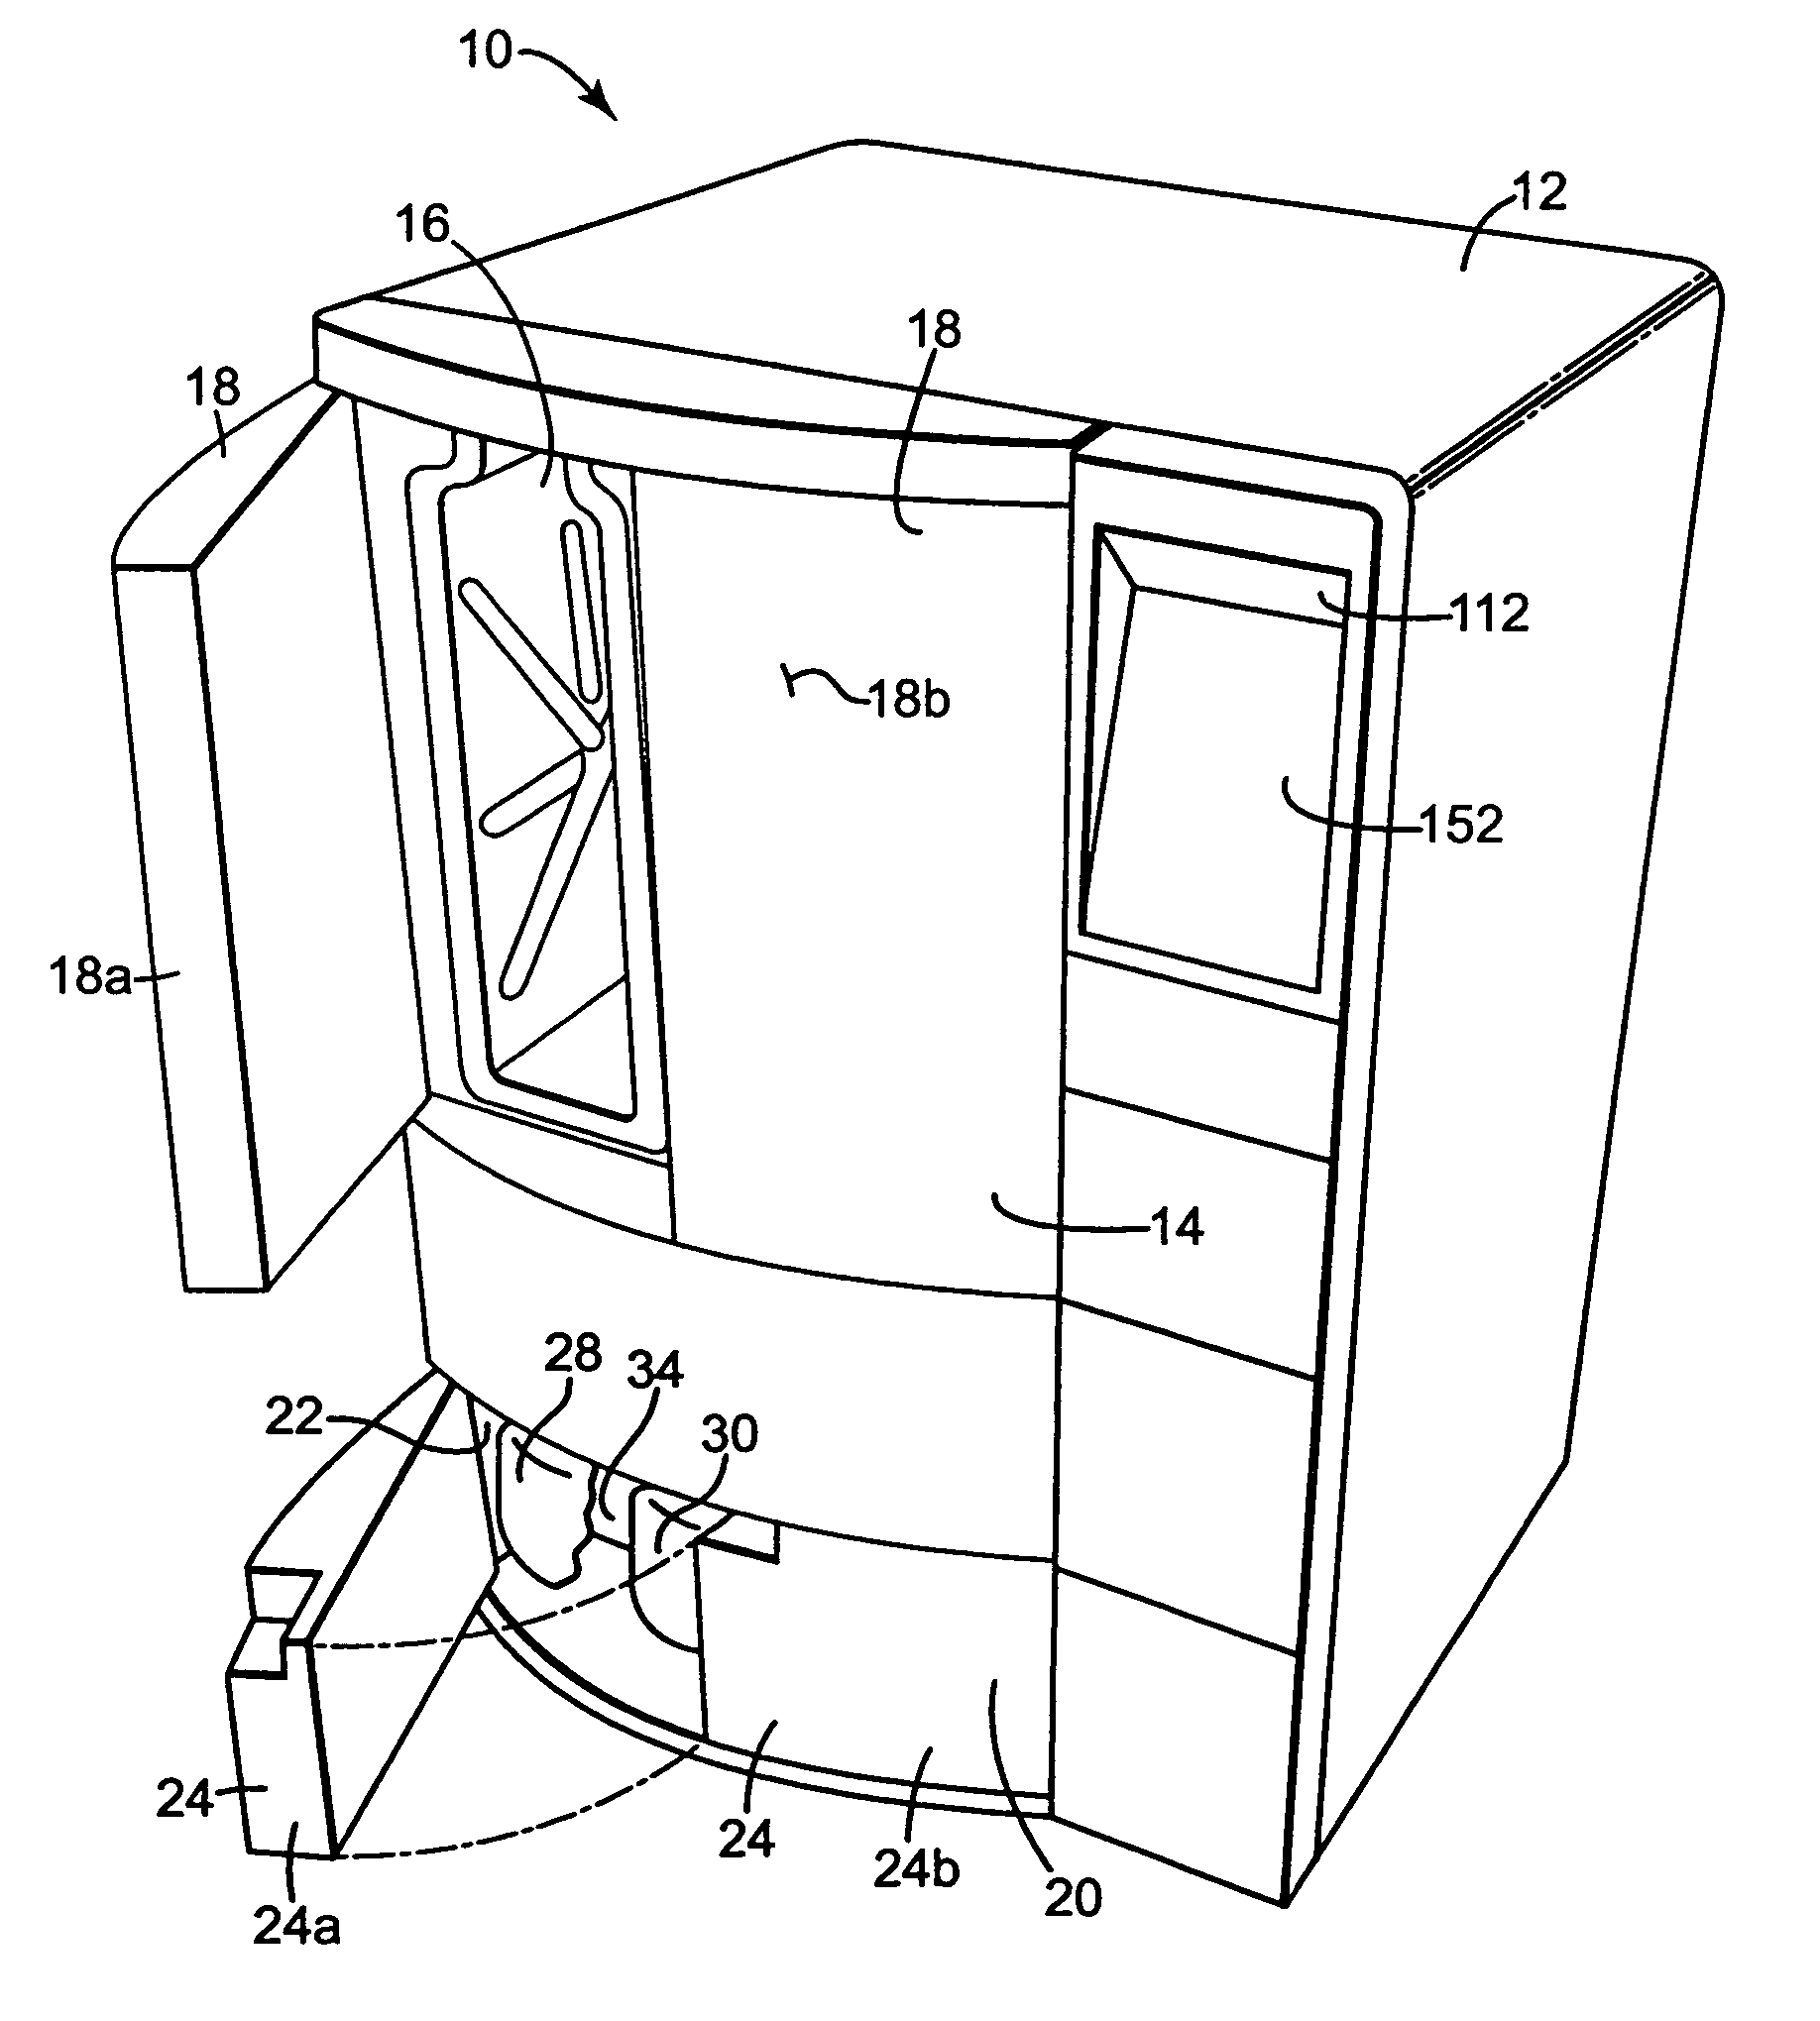 Apparatus and method for steam reprocessing flexible endoscopes